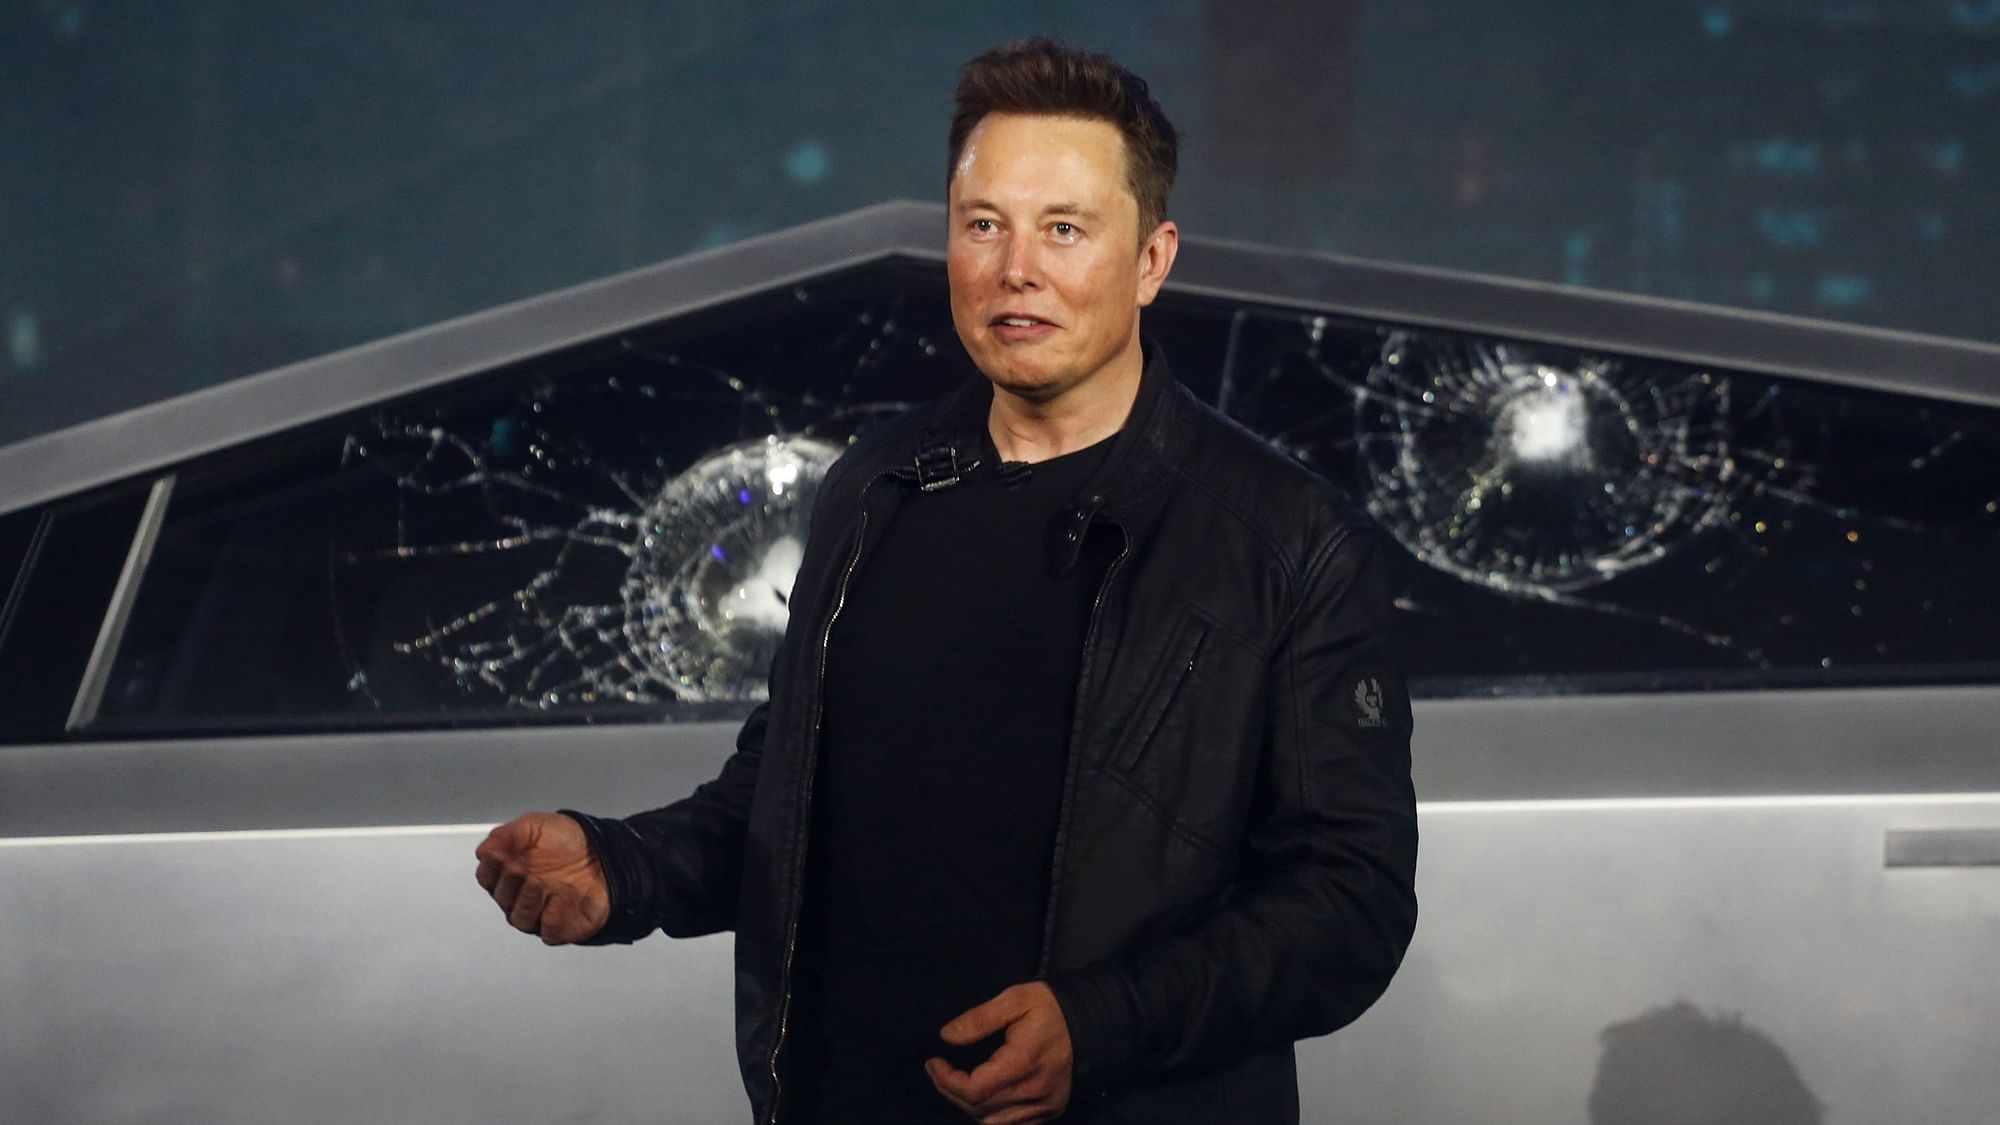 The big reveal of Tesla’s electric pick-up went embarrassingly wrong when the supposedly impact-proof windows smashed.